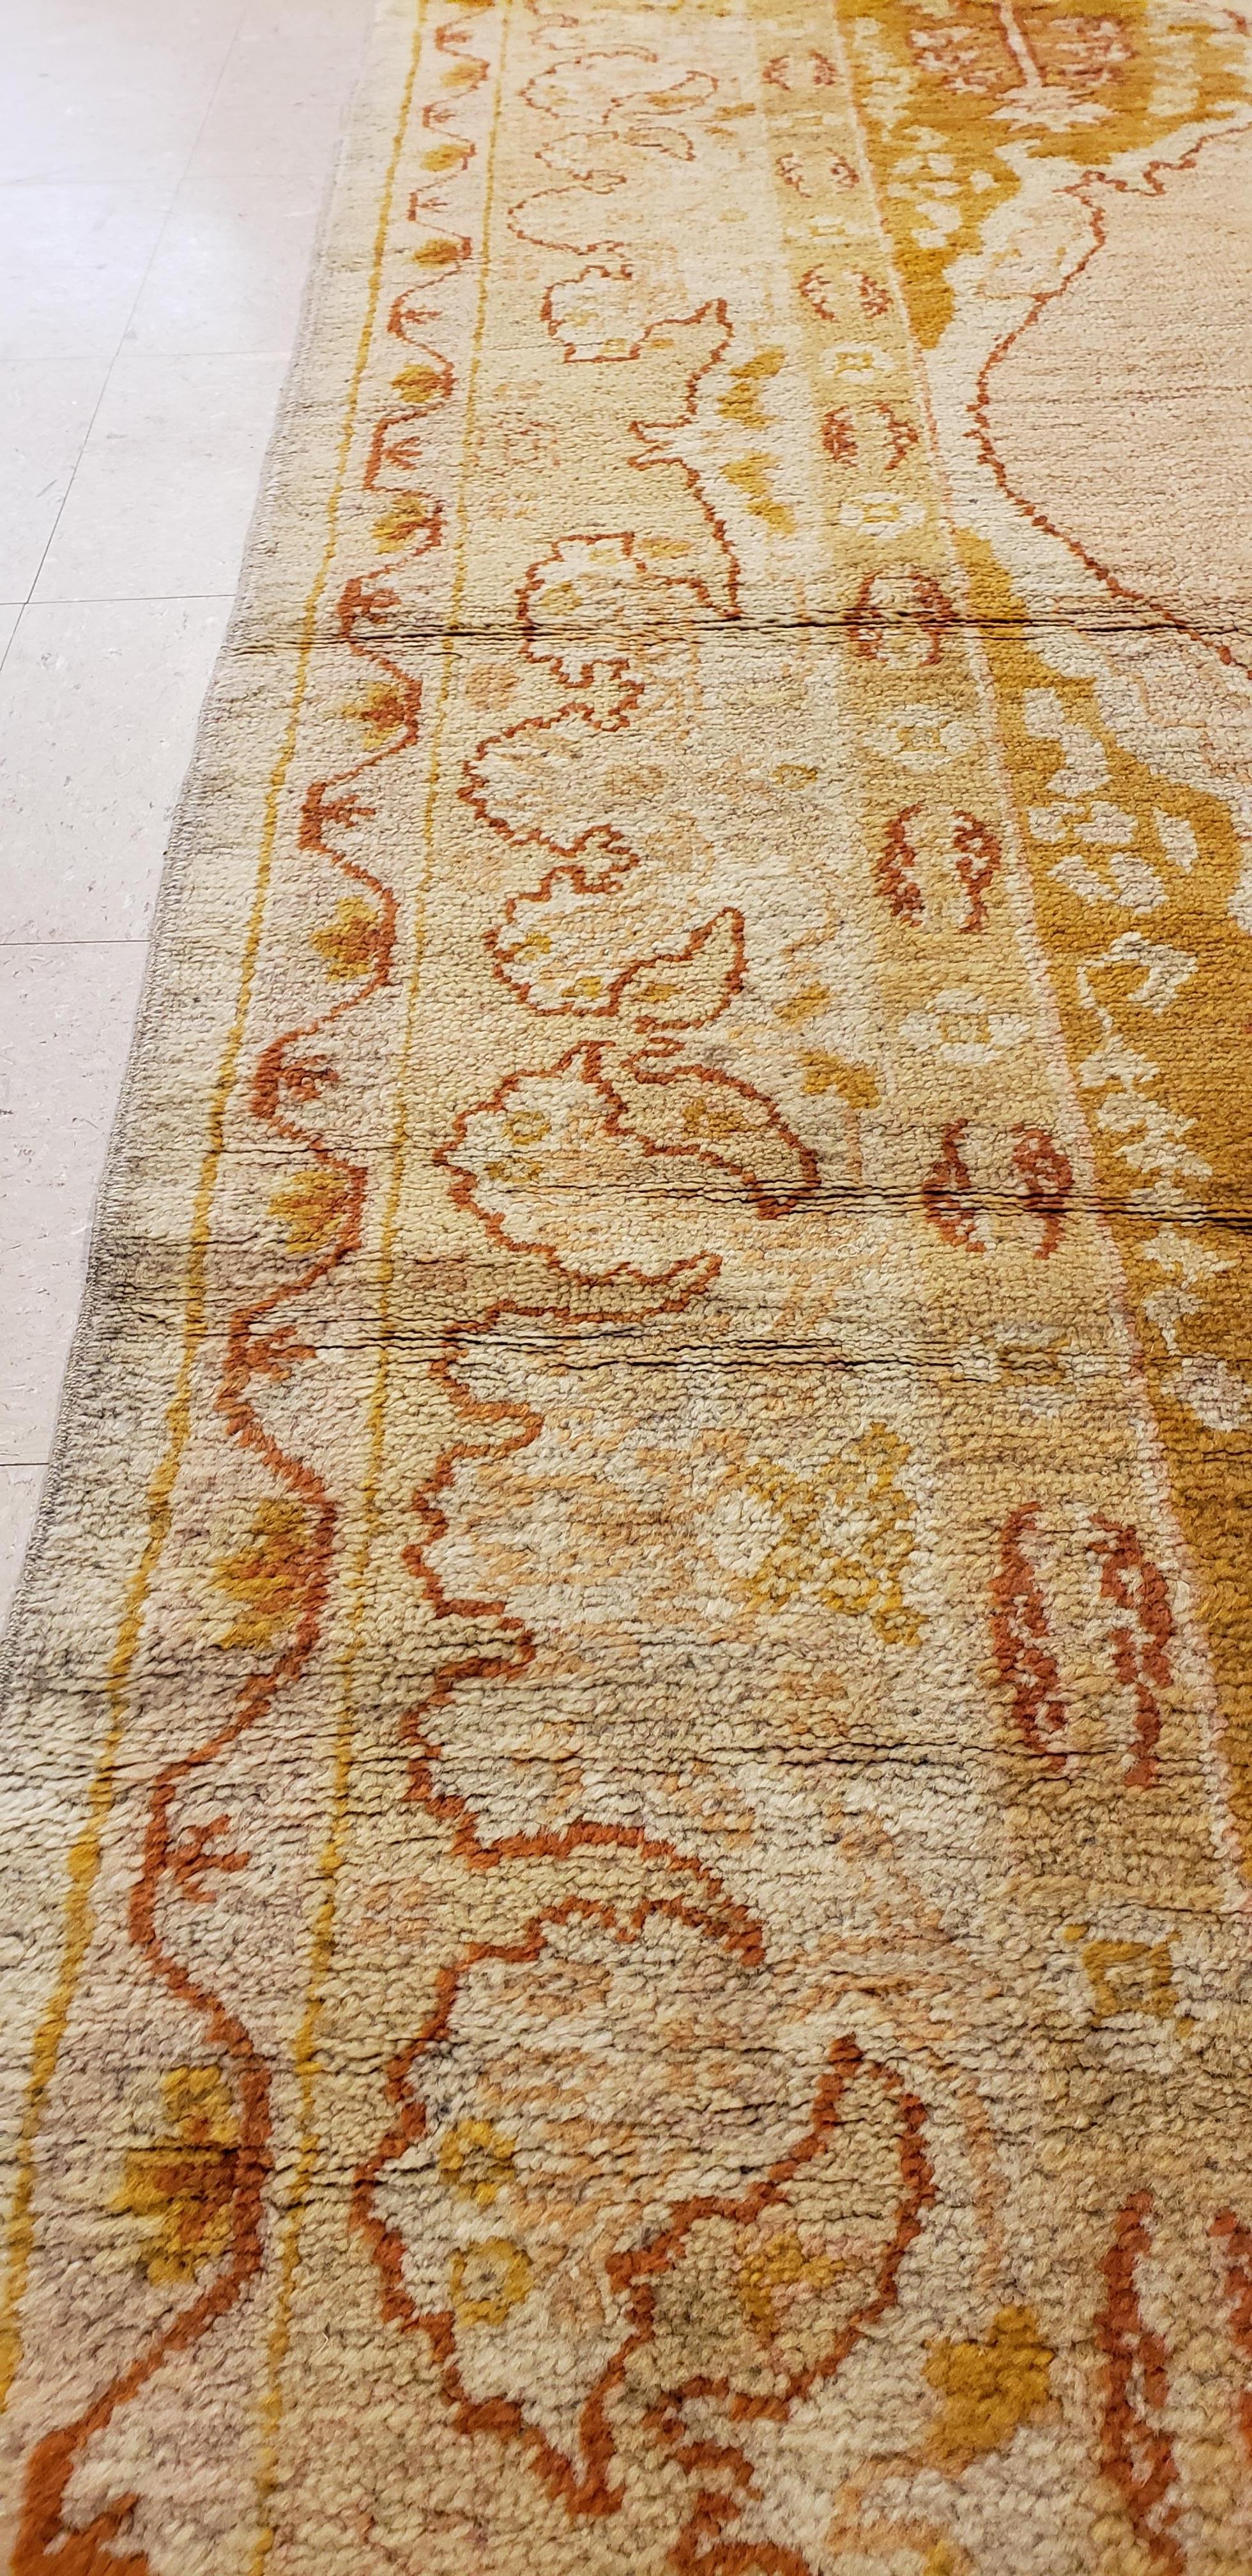 West Anatolia is one of the largest weaving regions in Turkey. Since the 15th century, Turkish rugs have always been on top of the list for having fine Oriental rugs.
Oushak rugs such as this, are desirable in today’s highly decorative market. A